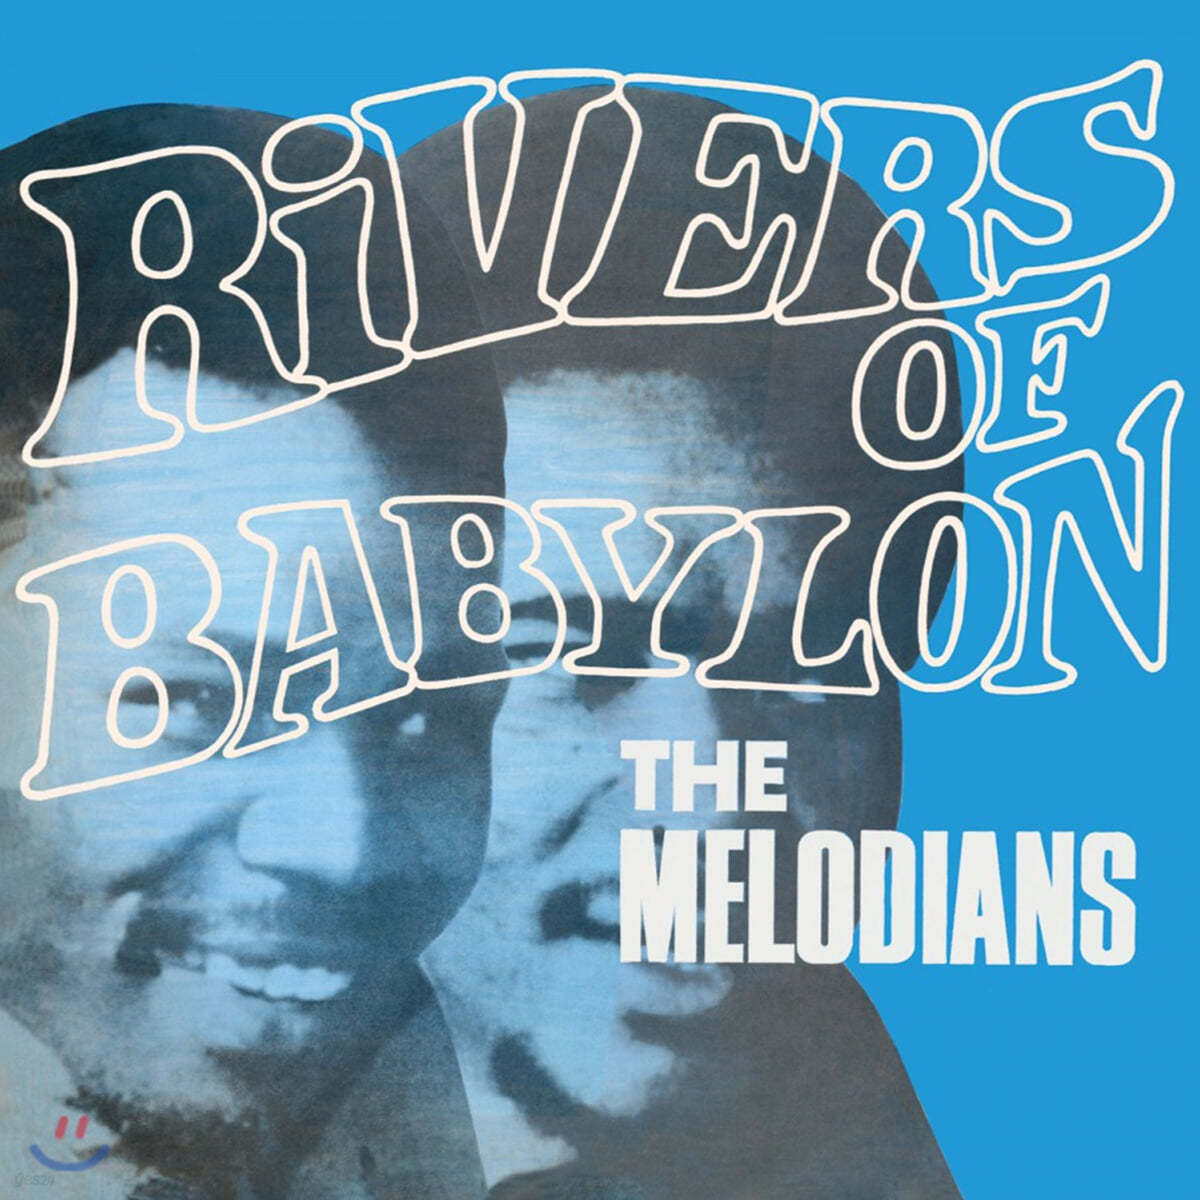 The Melodians (멜로디언) - Rivers Of Babylon [LP] 